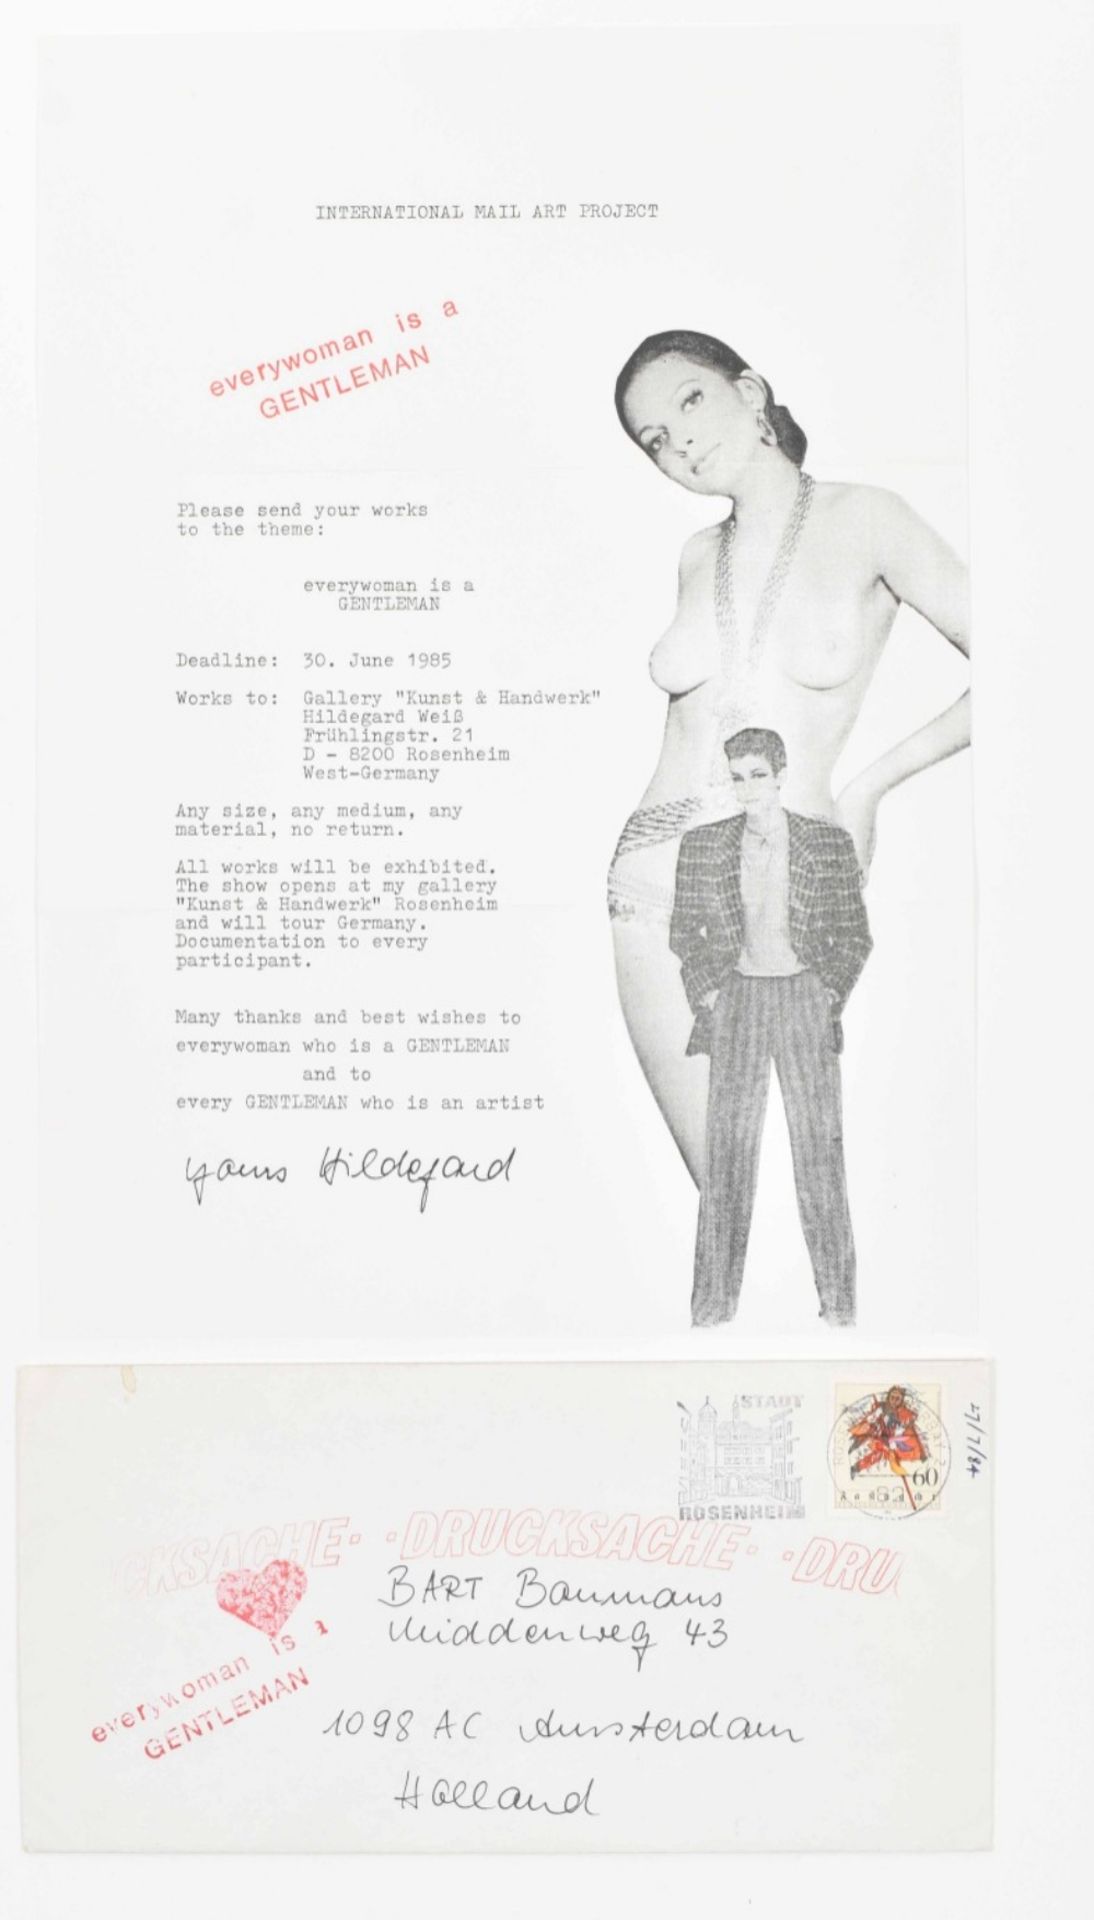 Mail art exhibition flyers - Image 4 of 9